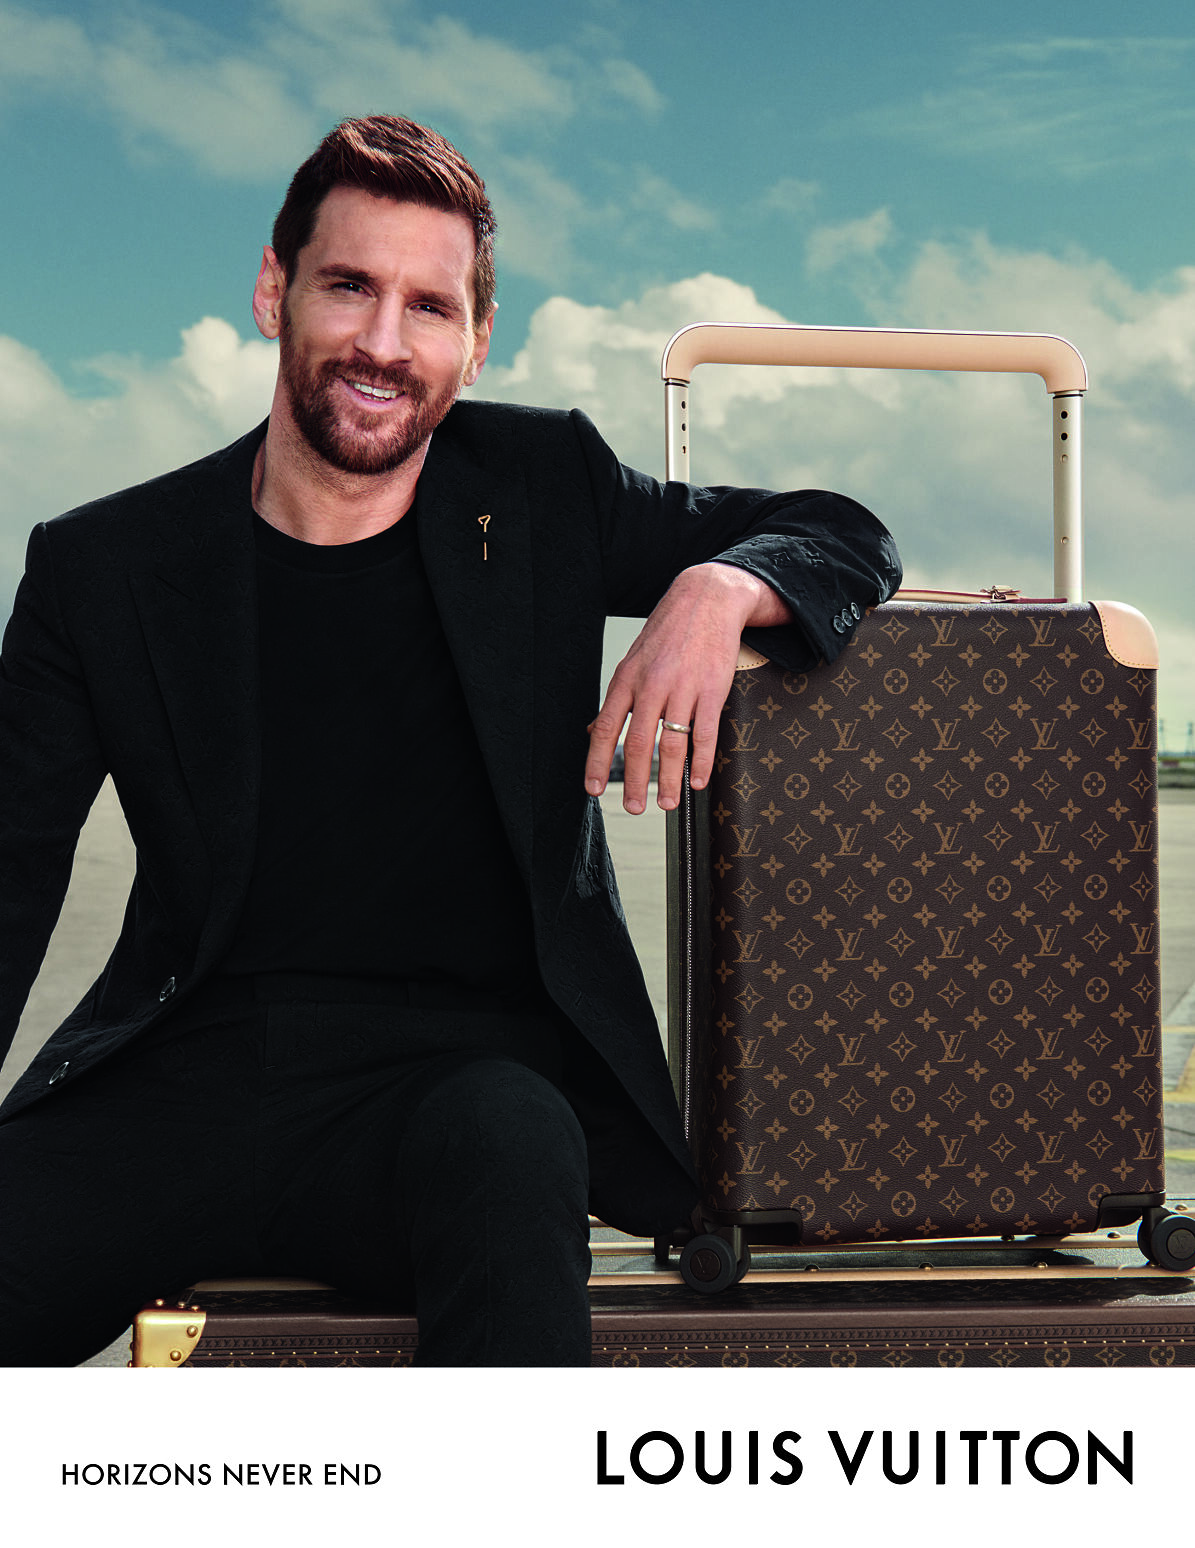 LV_LIONEL MESSI STARS THE NEW TRAVEL CAMPAIGN_HORIZONS NEVER END (2)